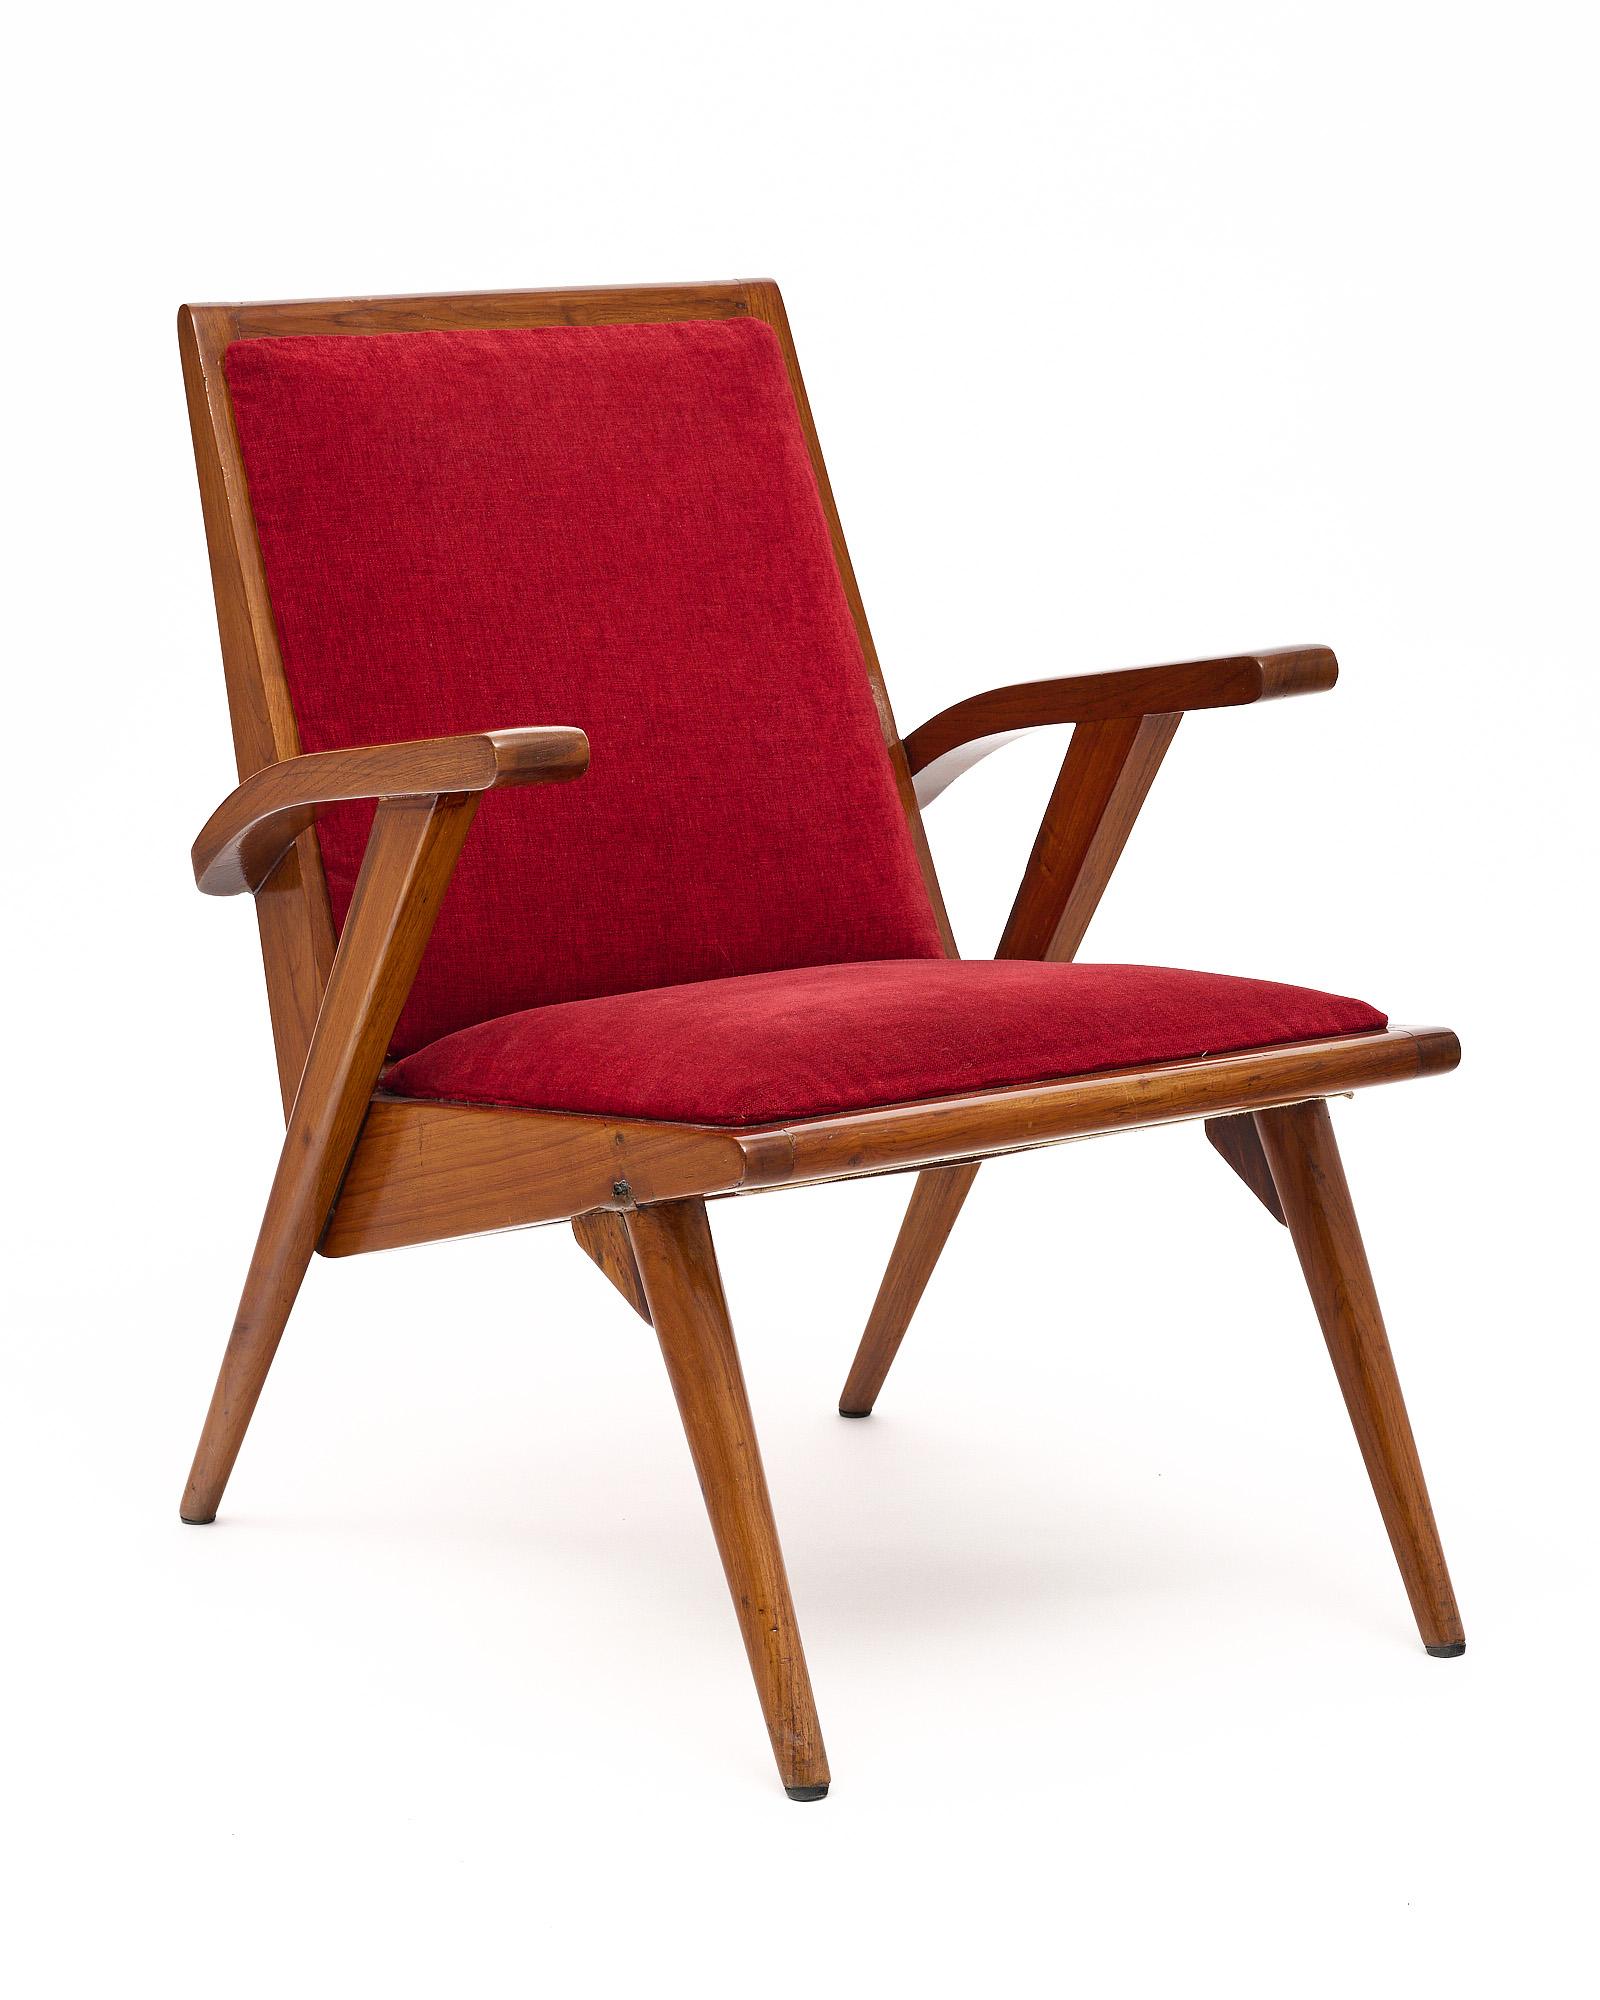 Single armchair from Italy of the mid-century period. We love the strong lines and Italian style of this piece, specifically the craftsmanship of the wood. It has been finished in a lustrous French polish. It is upholstered in the original red